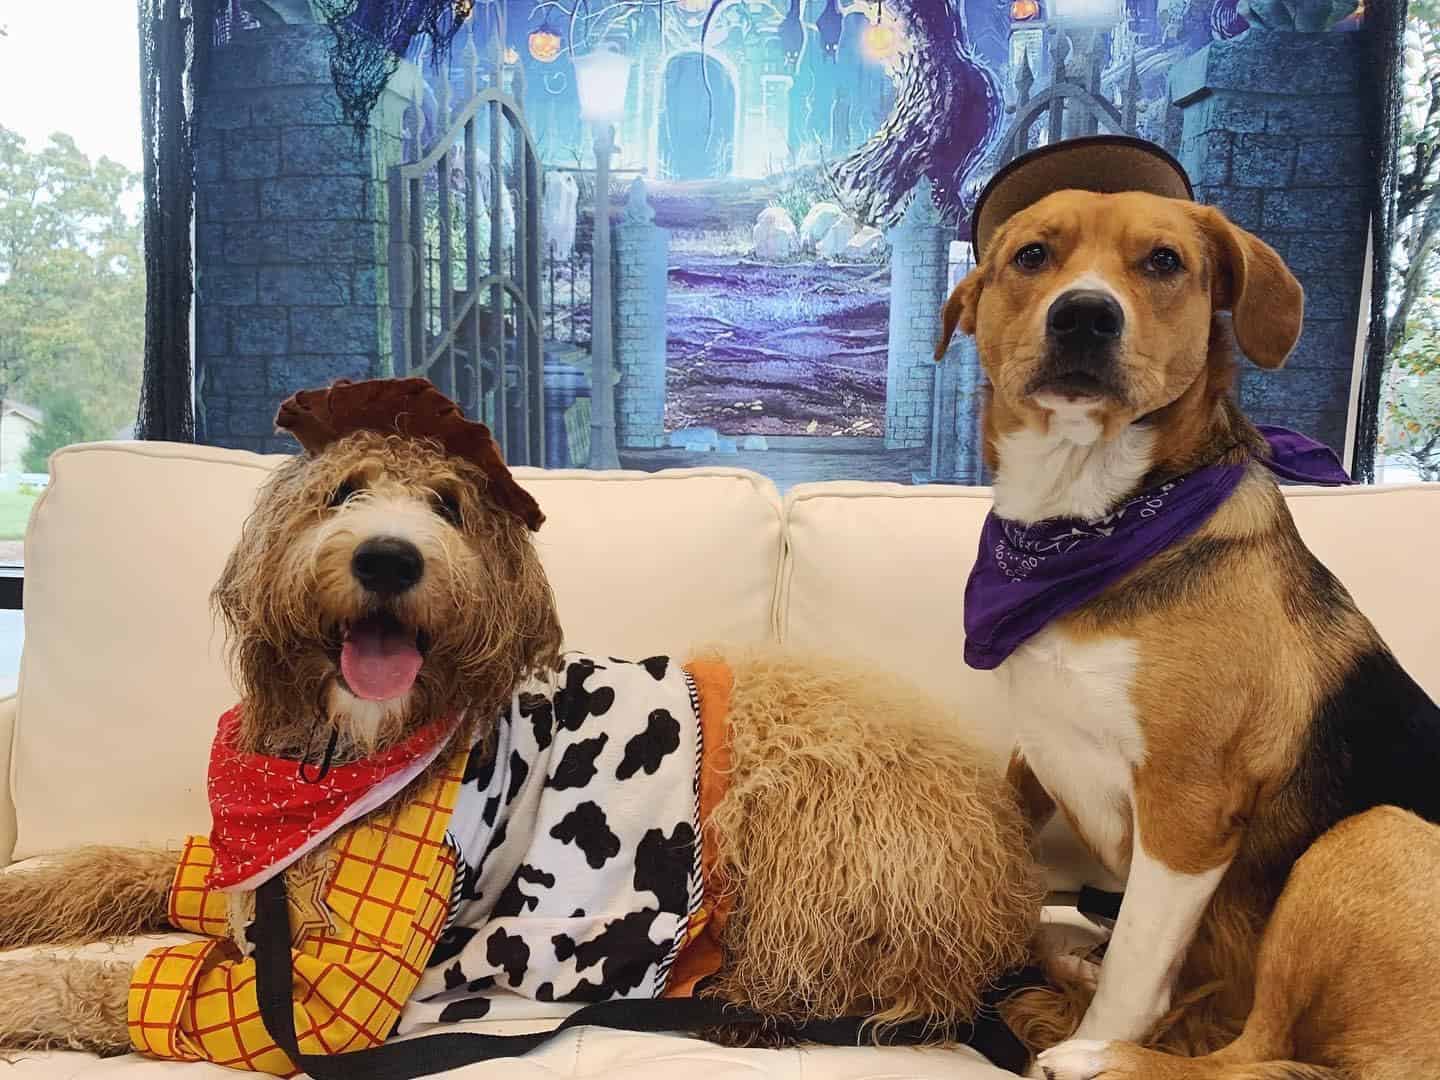 Dogs on vacation playing dress up